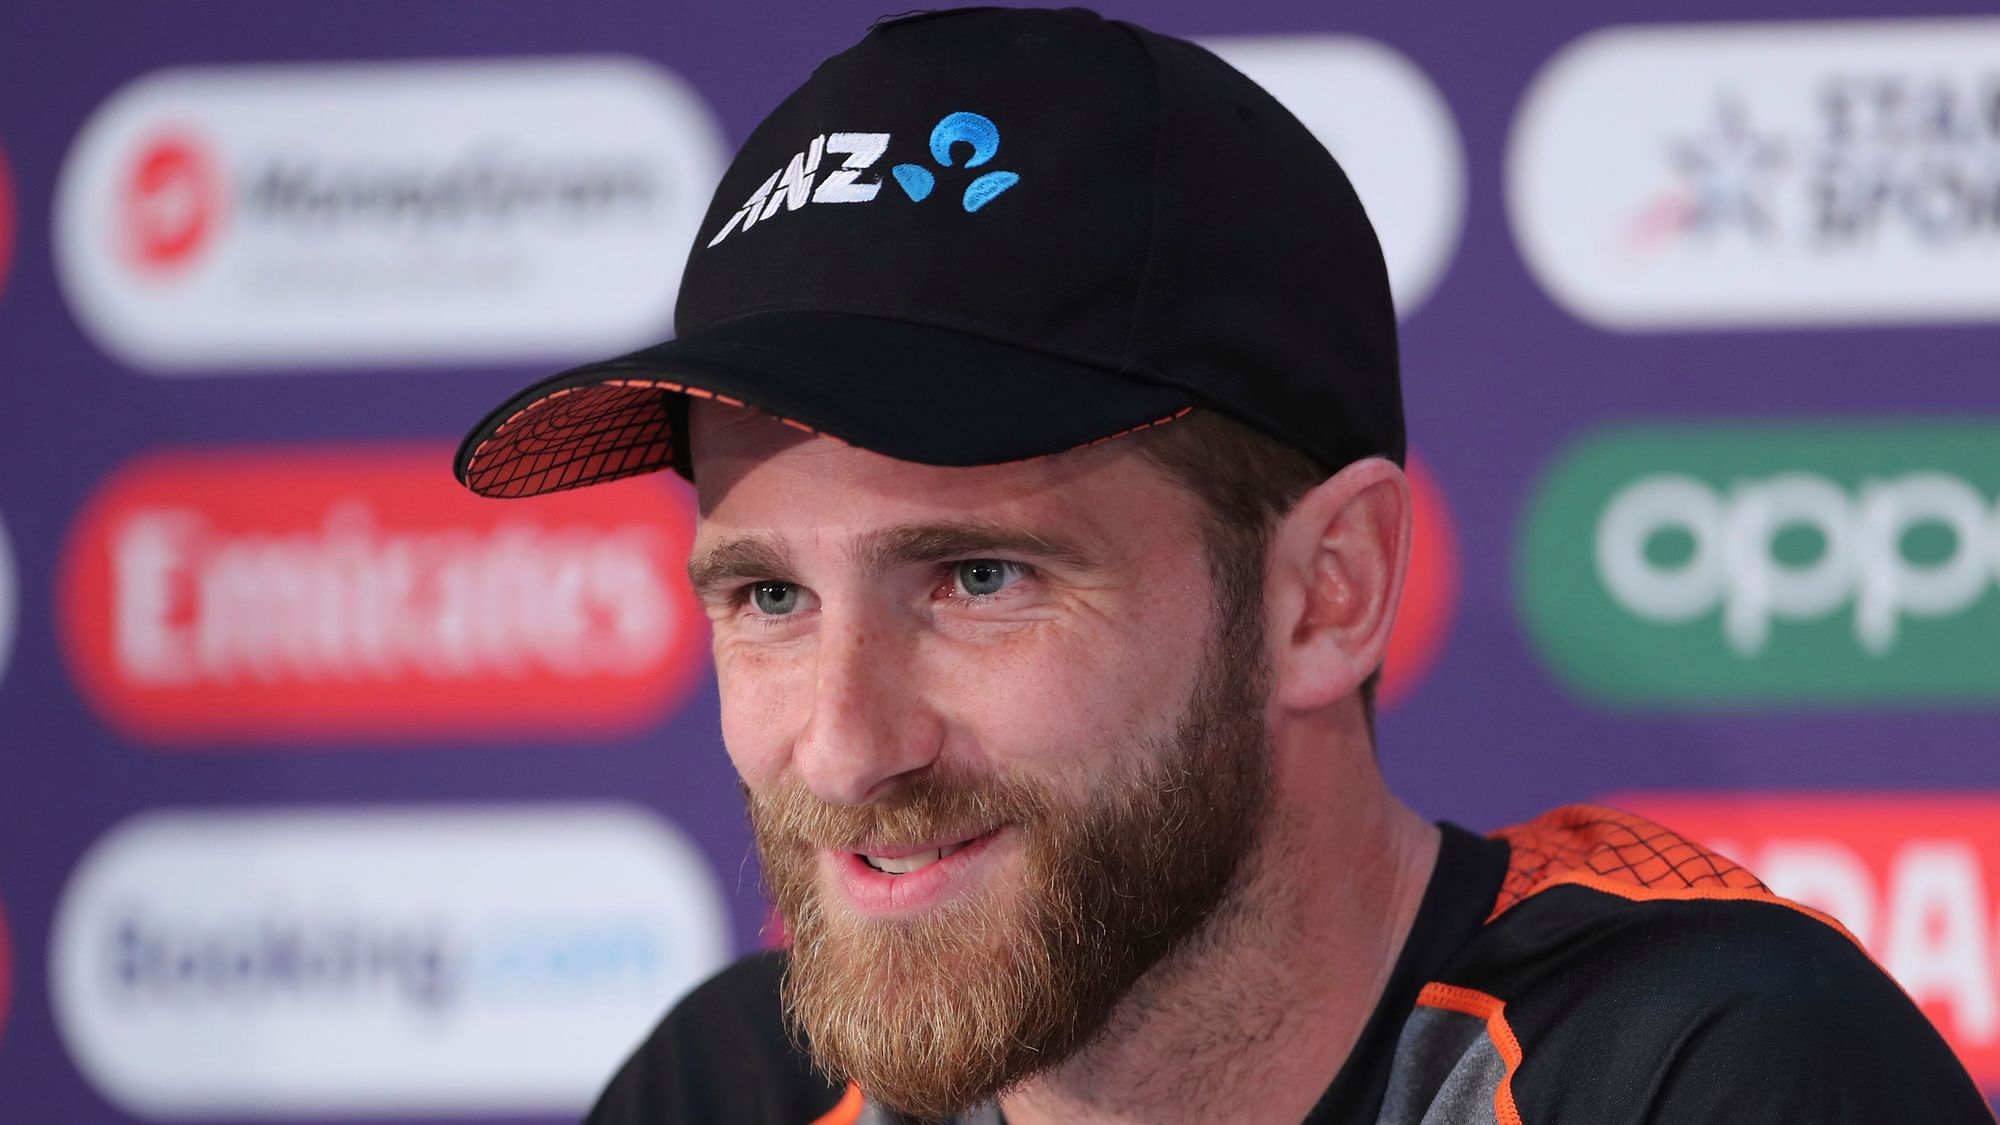 Williamson said New Zealand would look to put up a fighting performance in the World Cup final.